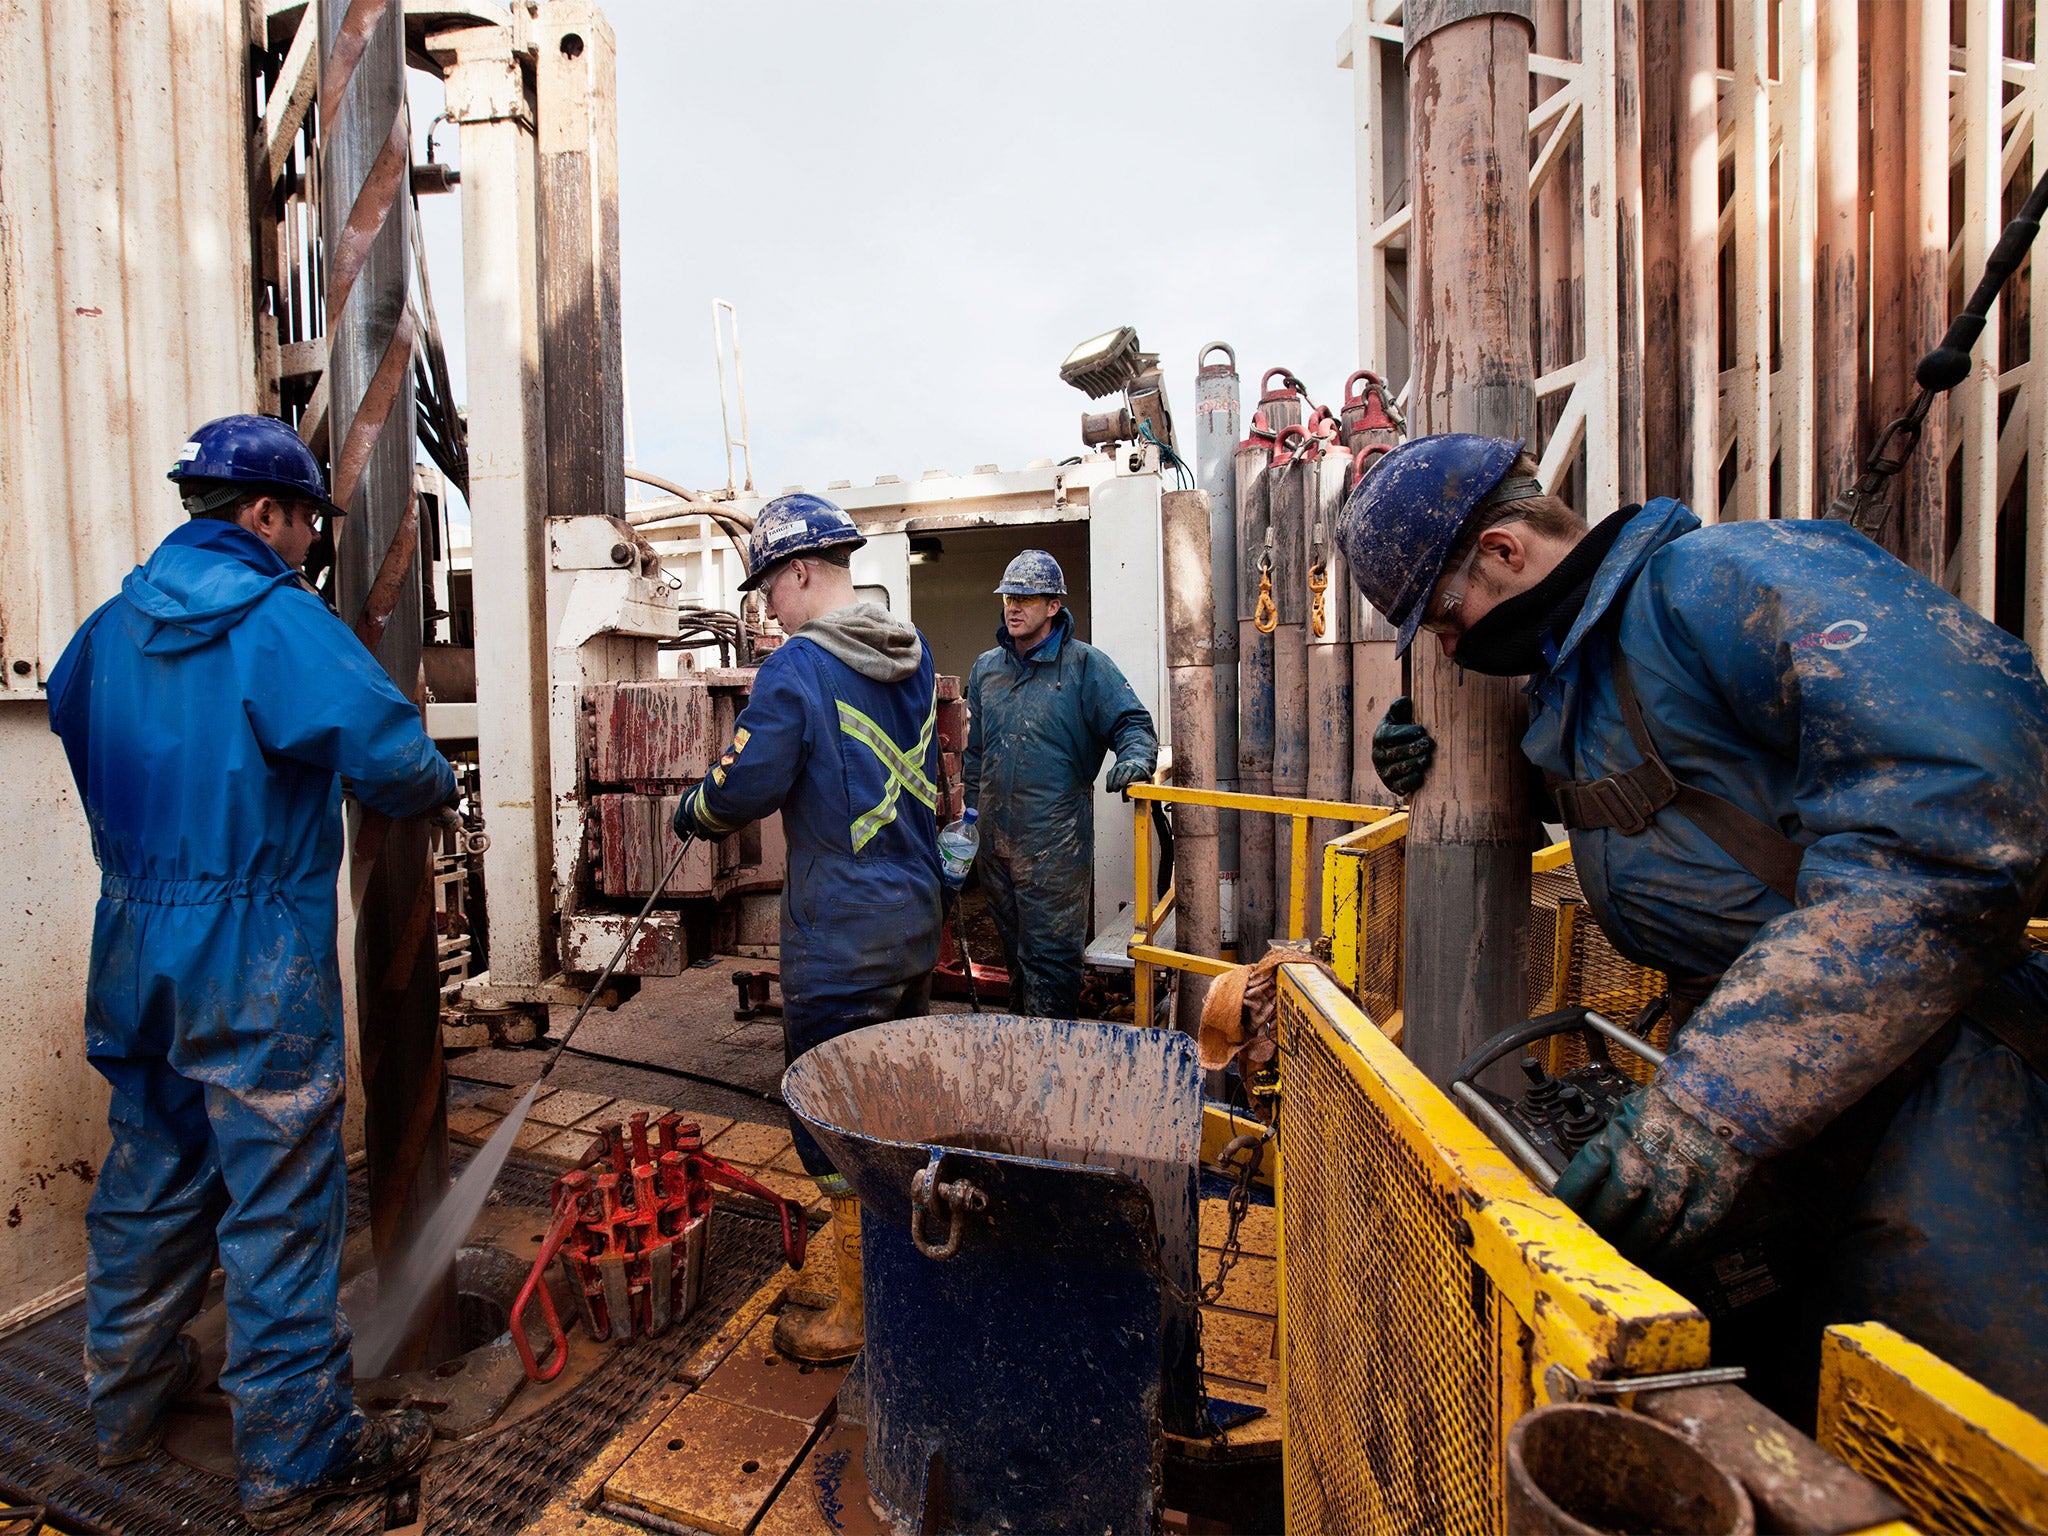 Engineers on the drilling platform of a Cuadrilla shale fracking facility in Preston, Lancashire, in 2012